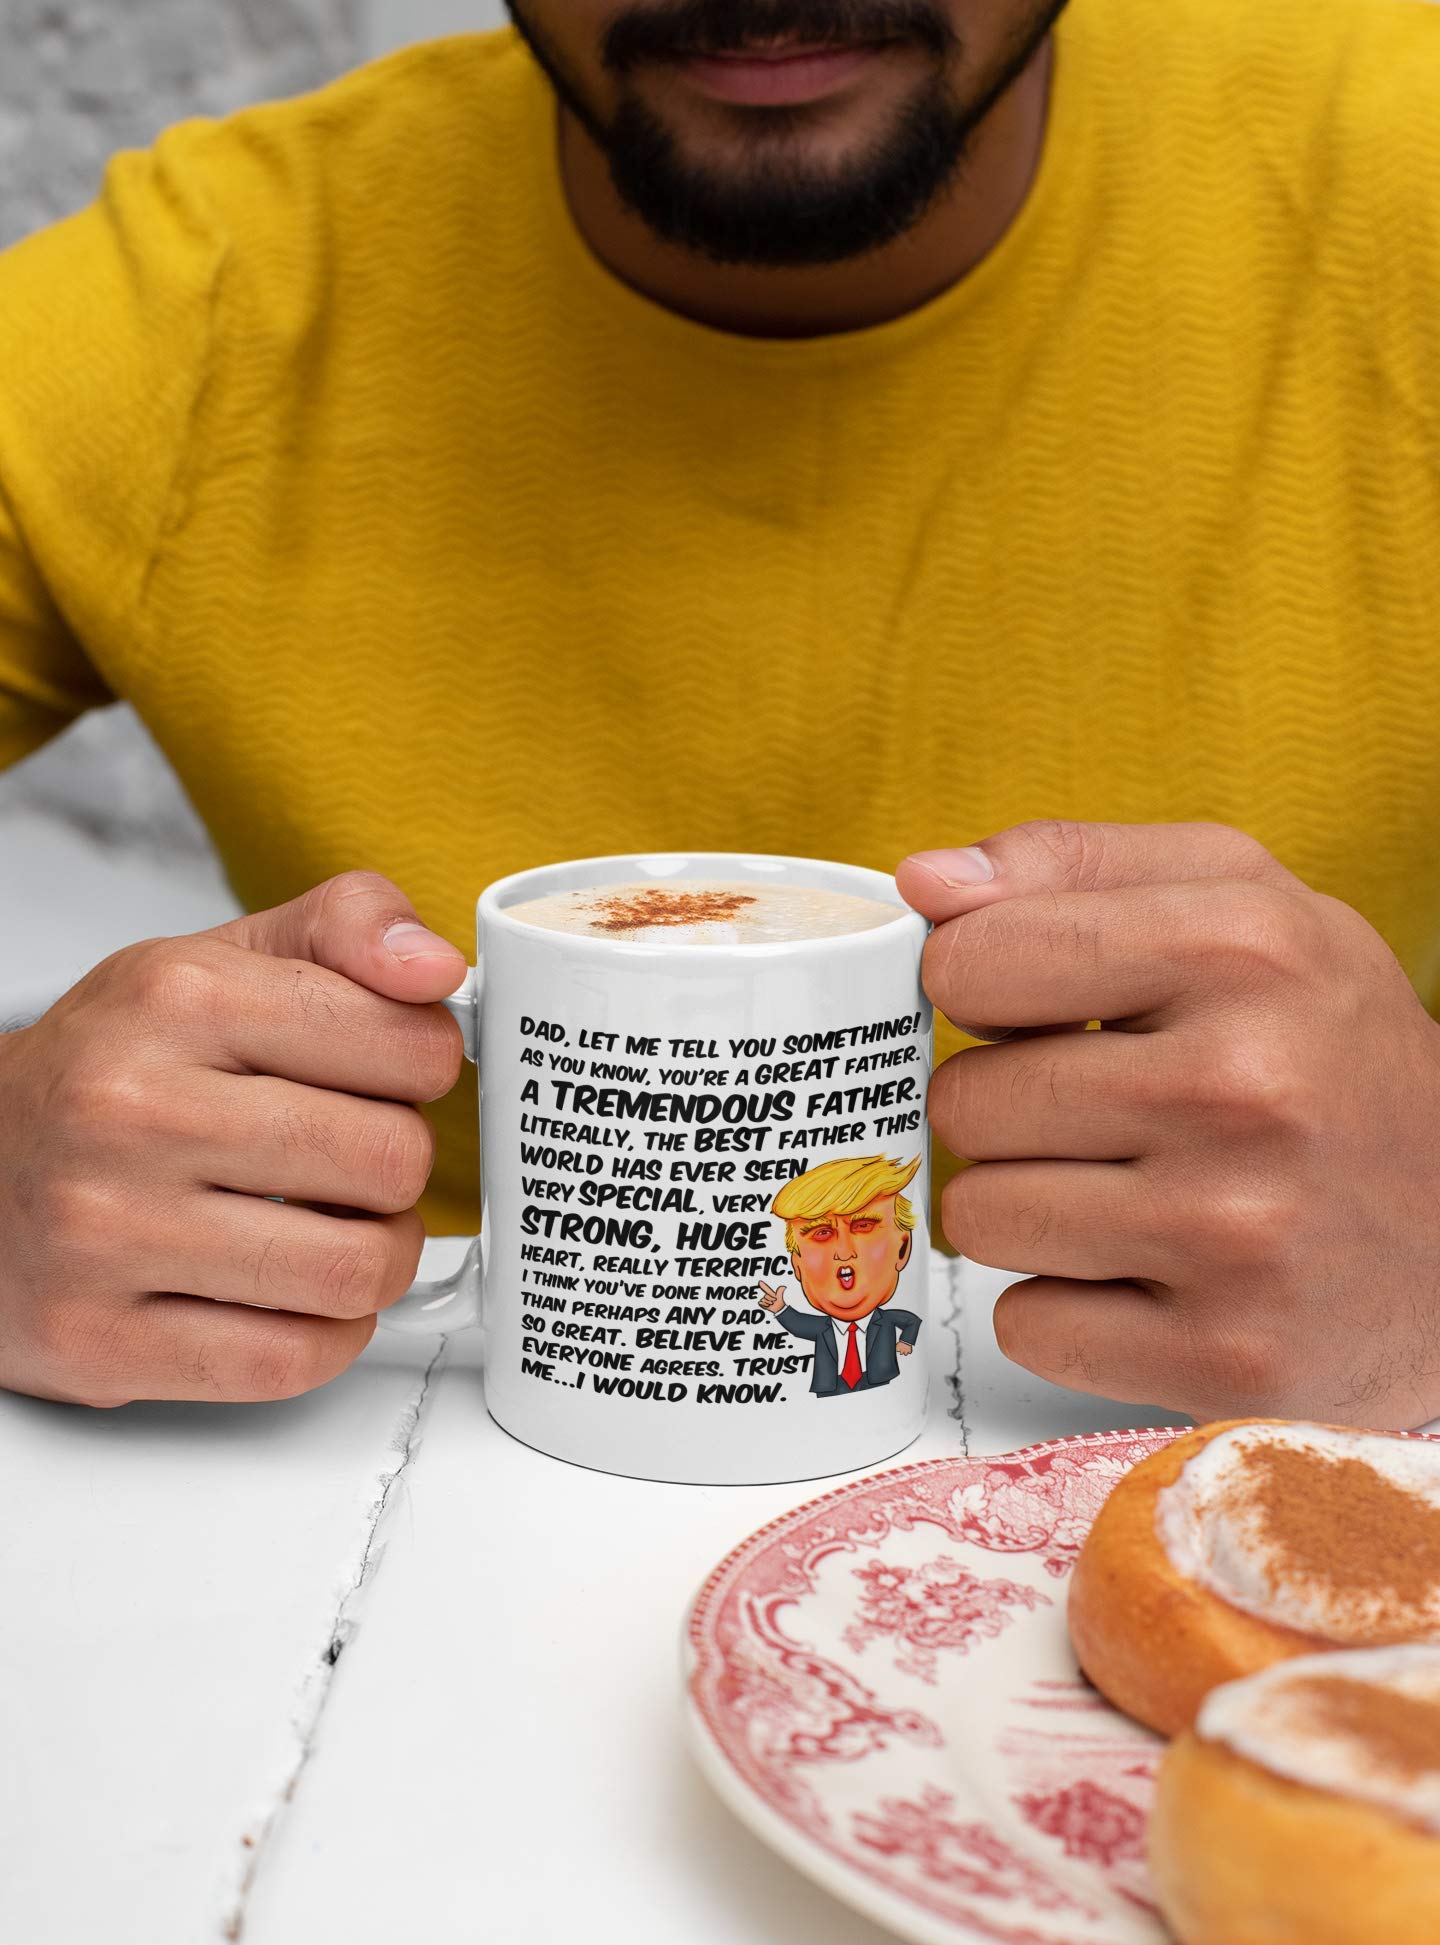 Find Funny Gift Ideas Fathers Day Donald Trump Mug Under 20 Dollars | Funny Fathers Day Mugs for Men President Trump Coffee Mugs | Gag Gifts for Dad - Fun Cups for Dads (Trump Fathers Day Mug)